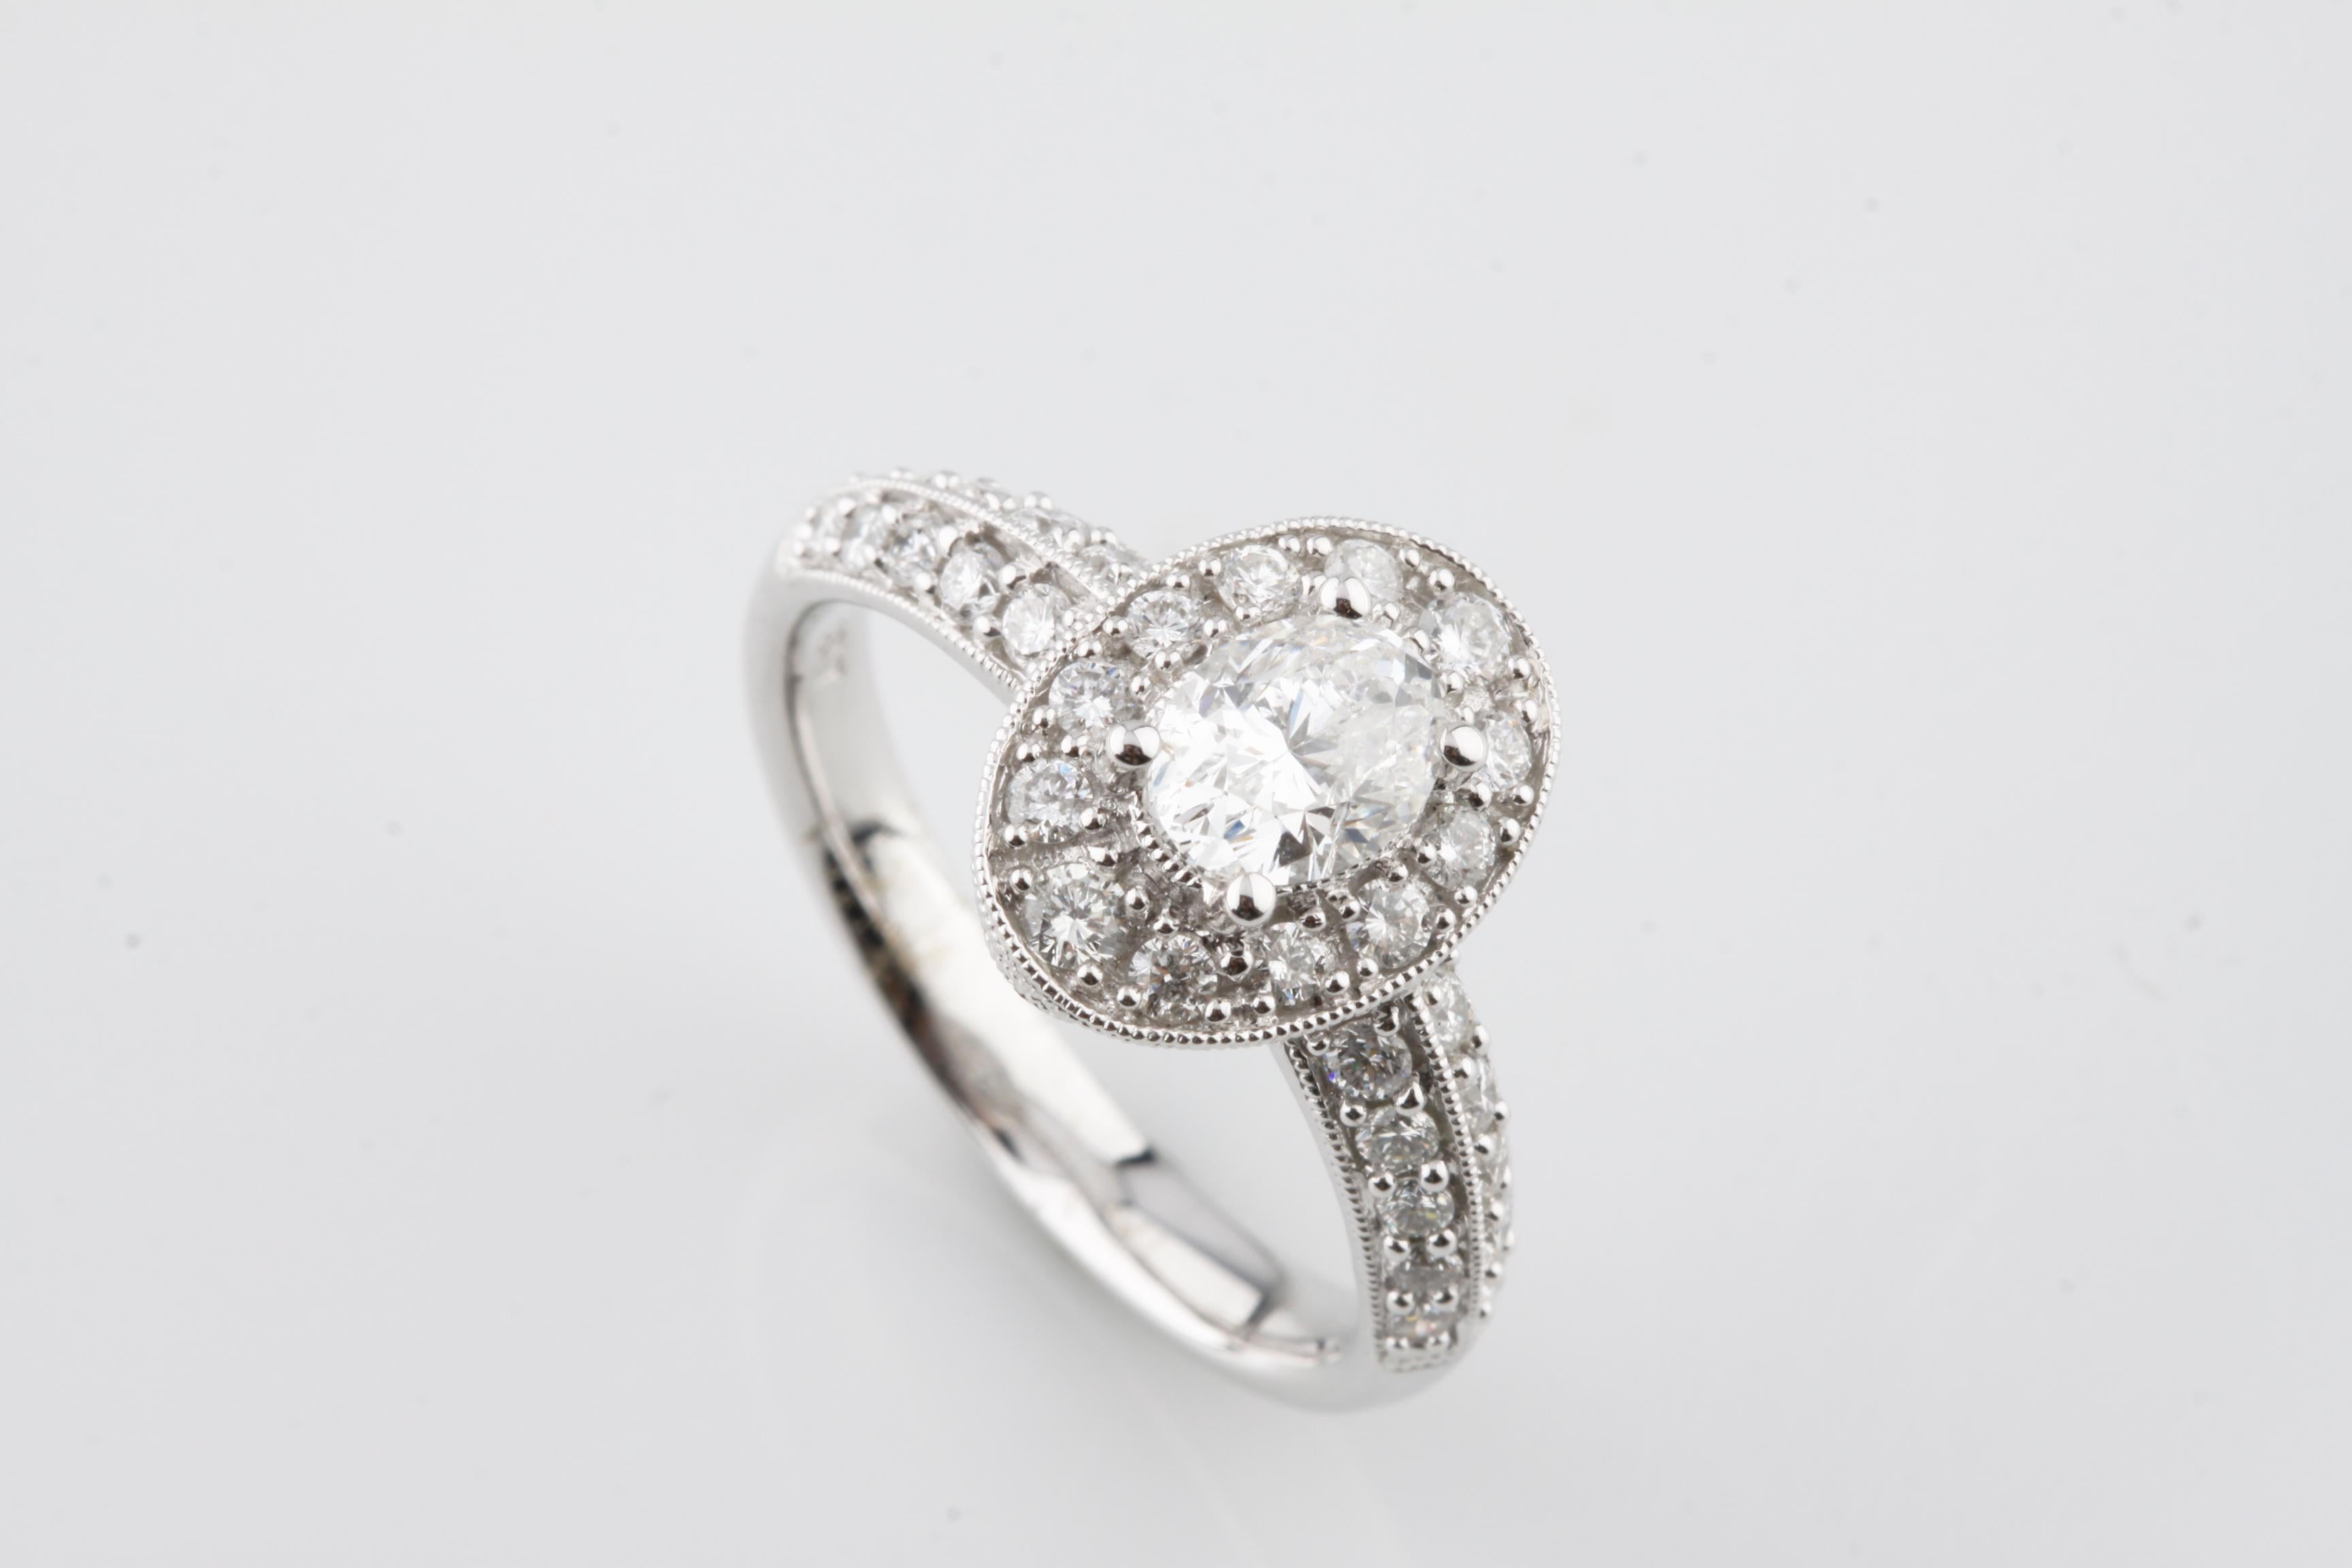 One electronically tested 18KT white gold ladies cast & assembled diamond ring with a bright & patterned finish.
Condition is new, good workmanship.
The ring features a diamond solitaire set within a gallery of diamonds, supported by diamonds set